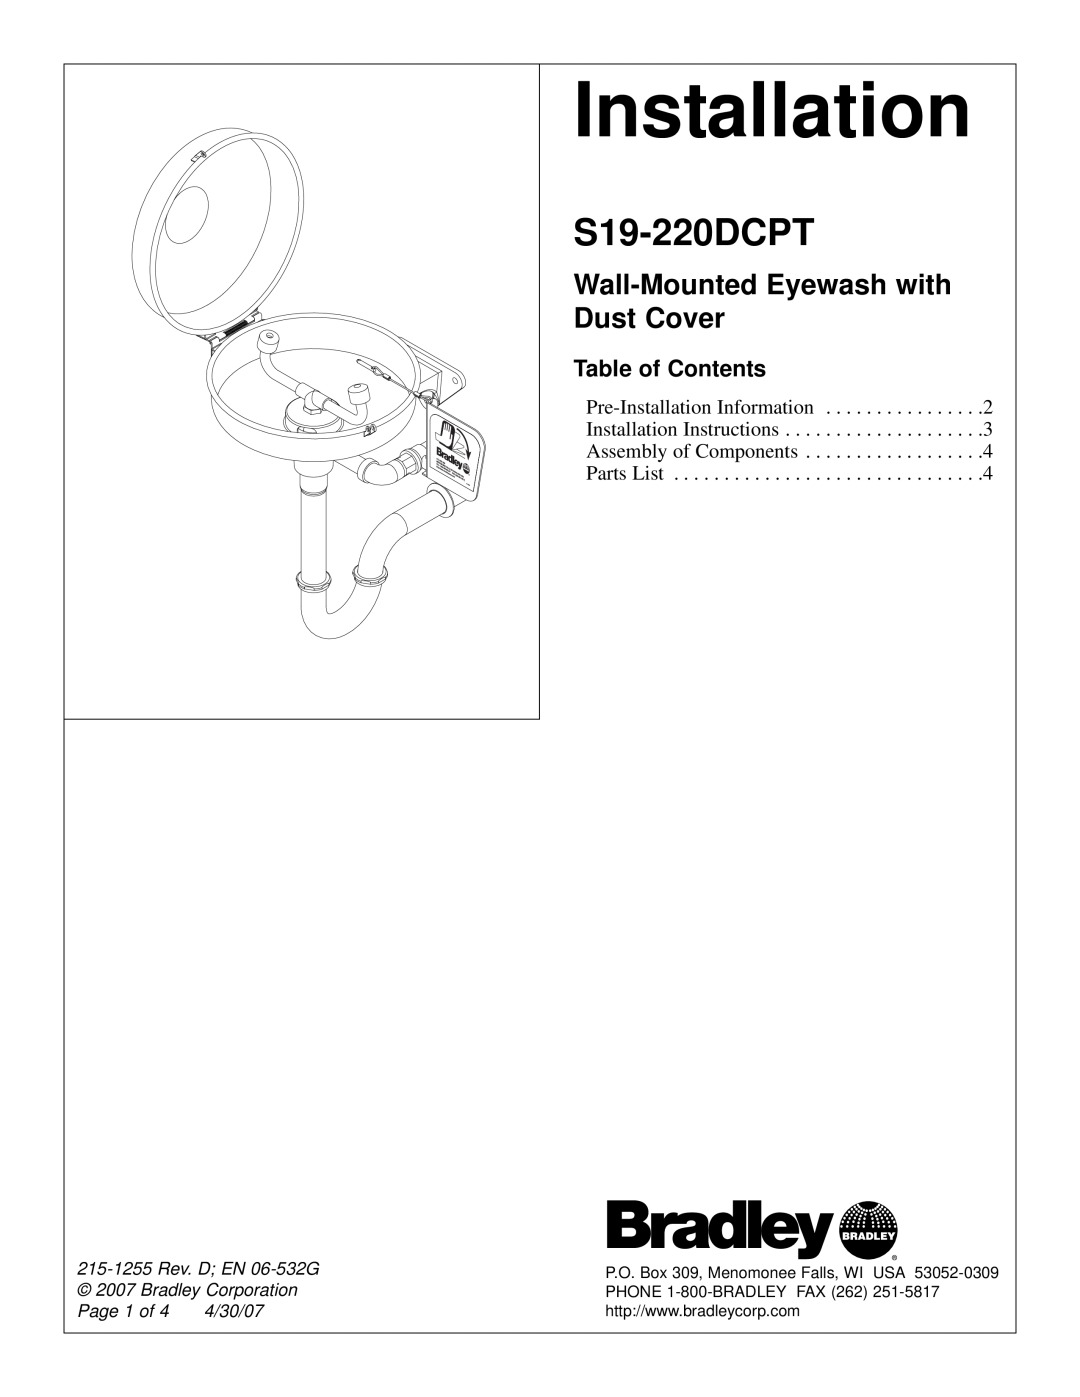 Bradley Smoker S19-220DCPT installation instructions Wall-Mounted Eyewash with, Dust Cover, Table of Contents, Parts List 